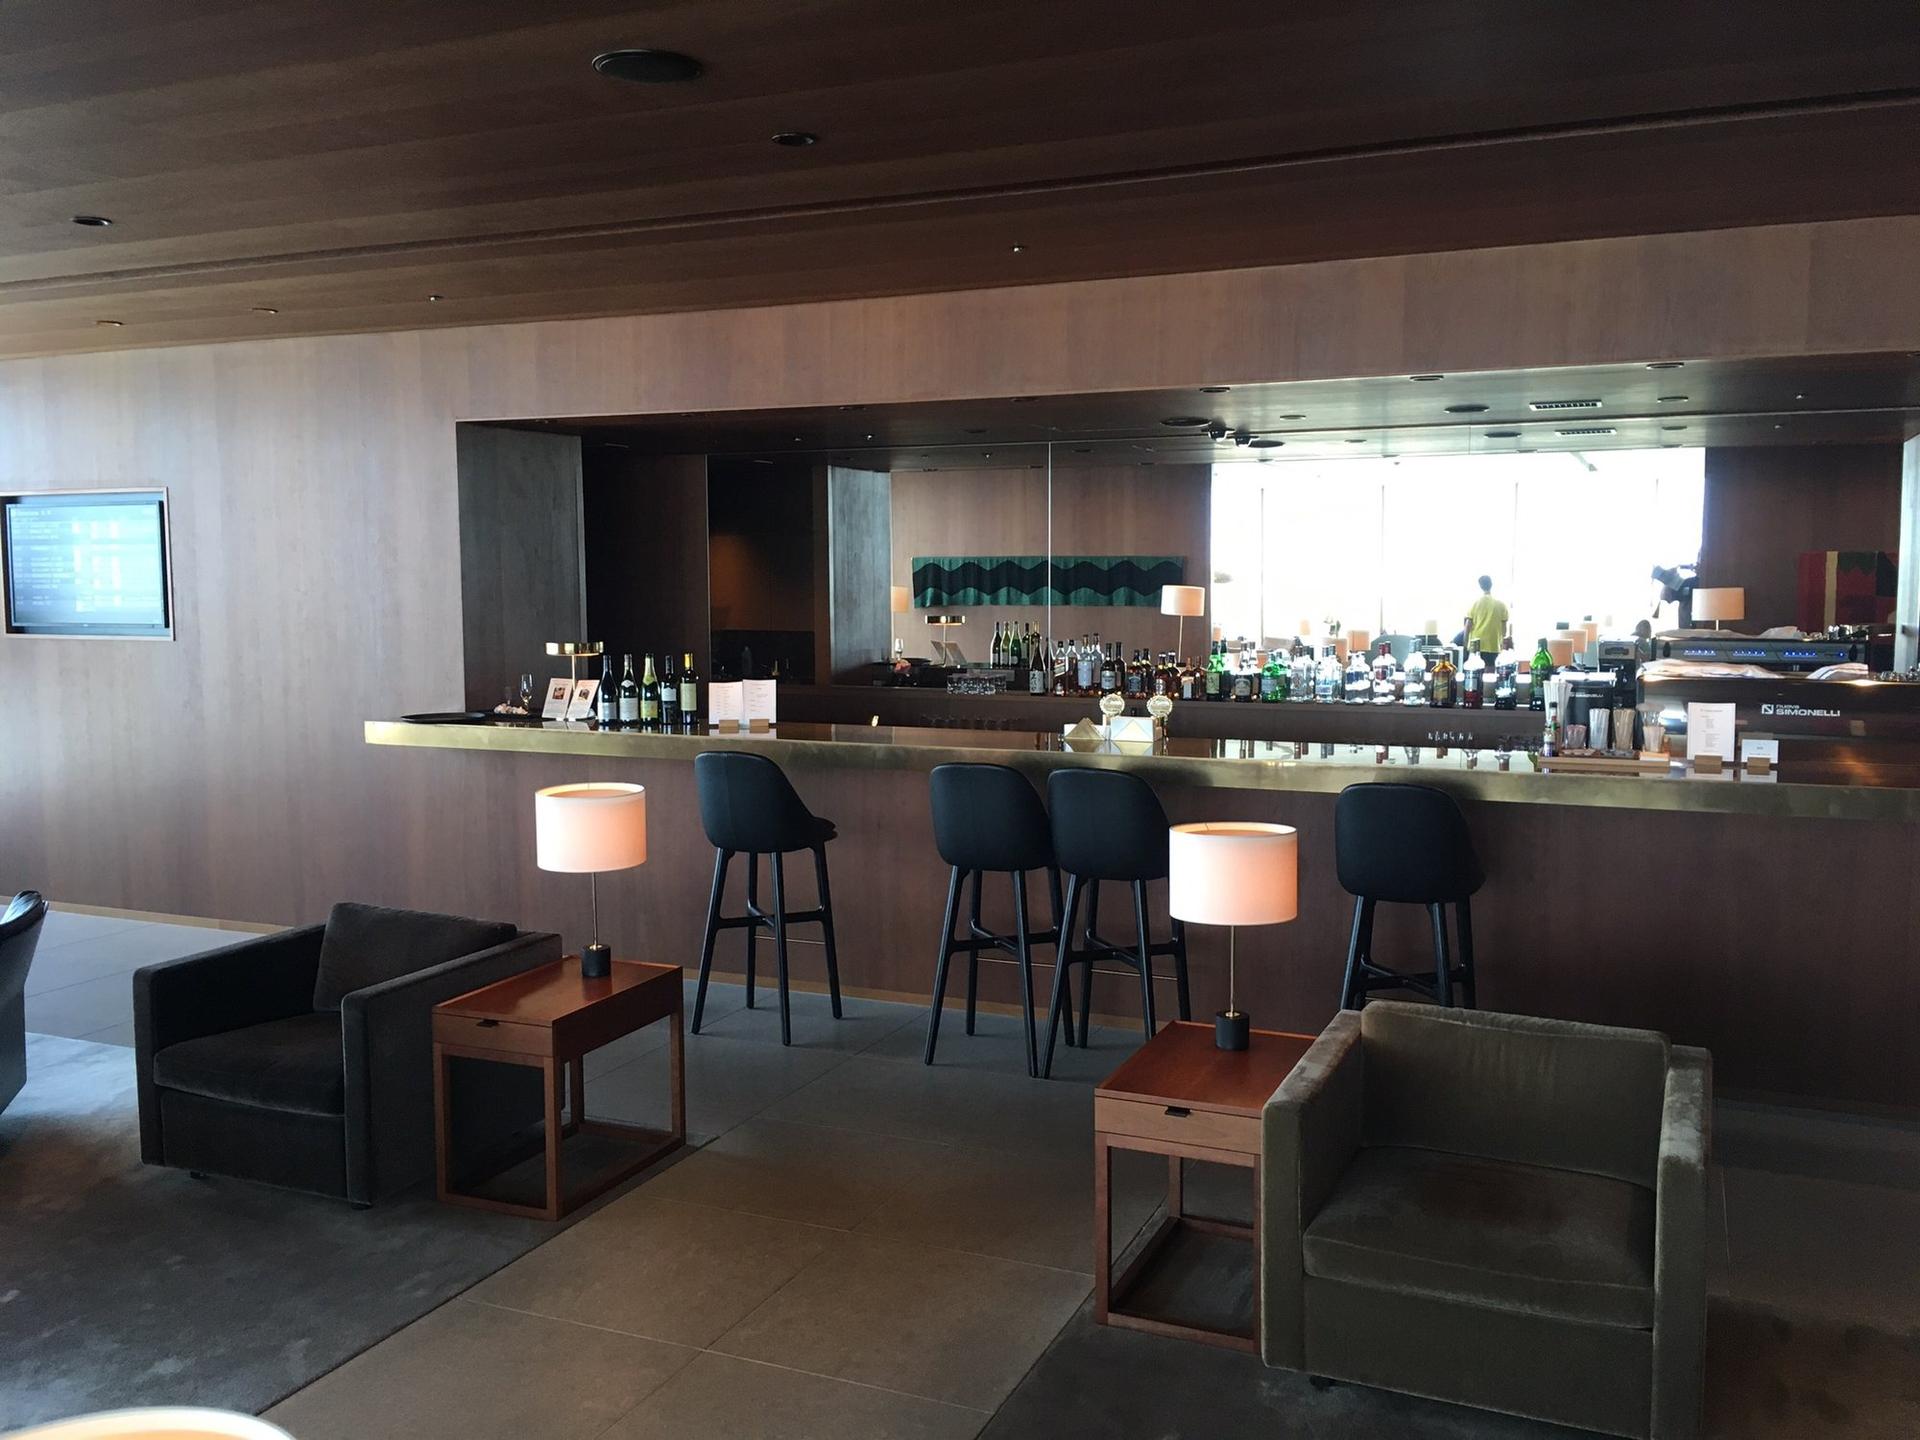 Cathay Pacific Lounge image 43 of 49